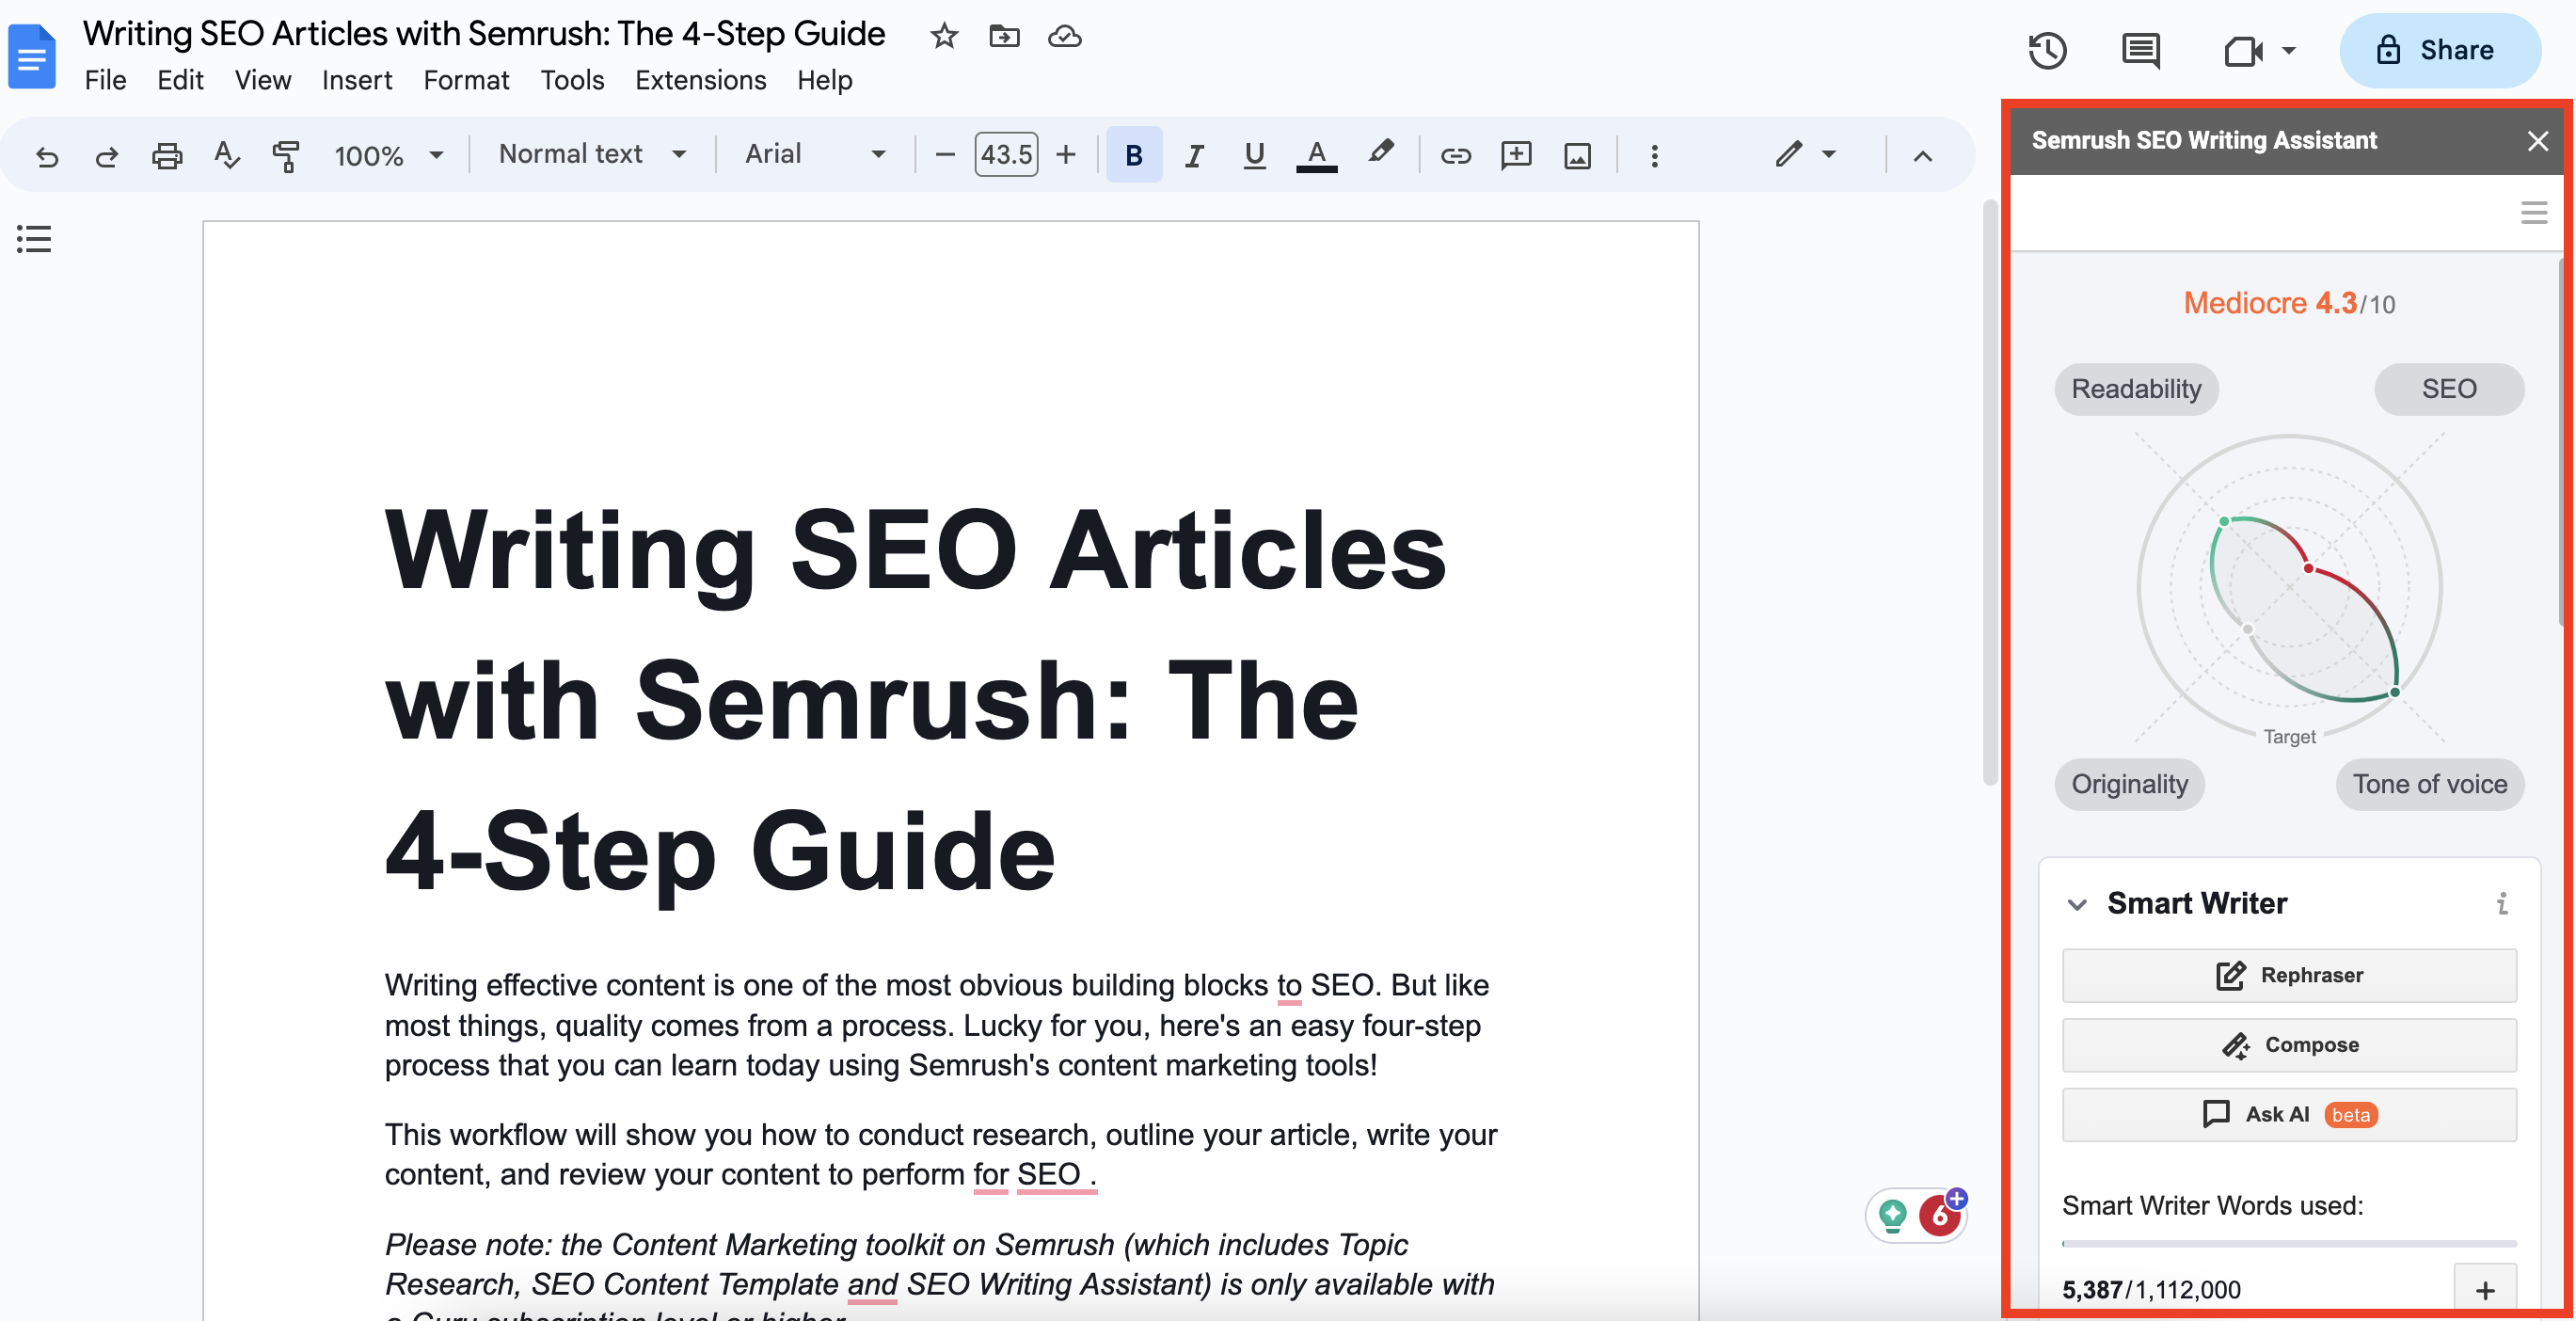 The SEO Writing Assistant tool with Google Docs. The tool showing the grading system - a score out of 10.  Below is the four categories: readability, originality, tone of voice and SEO. Below this is the Smart Writer Words section which shows the rephraser, compose, and ask AI buttons. 